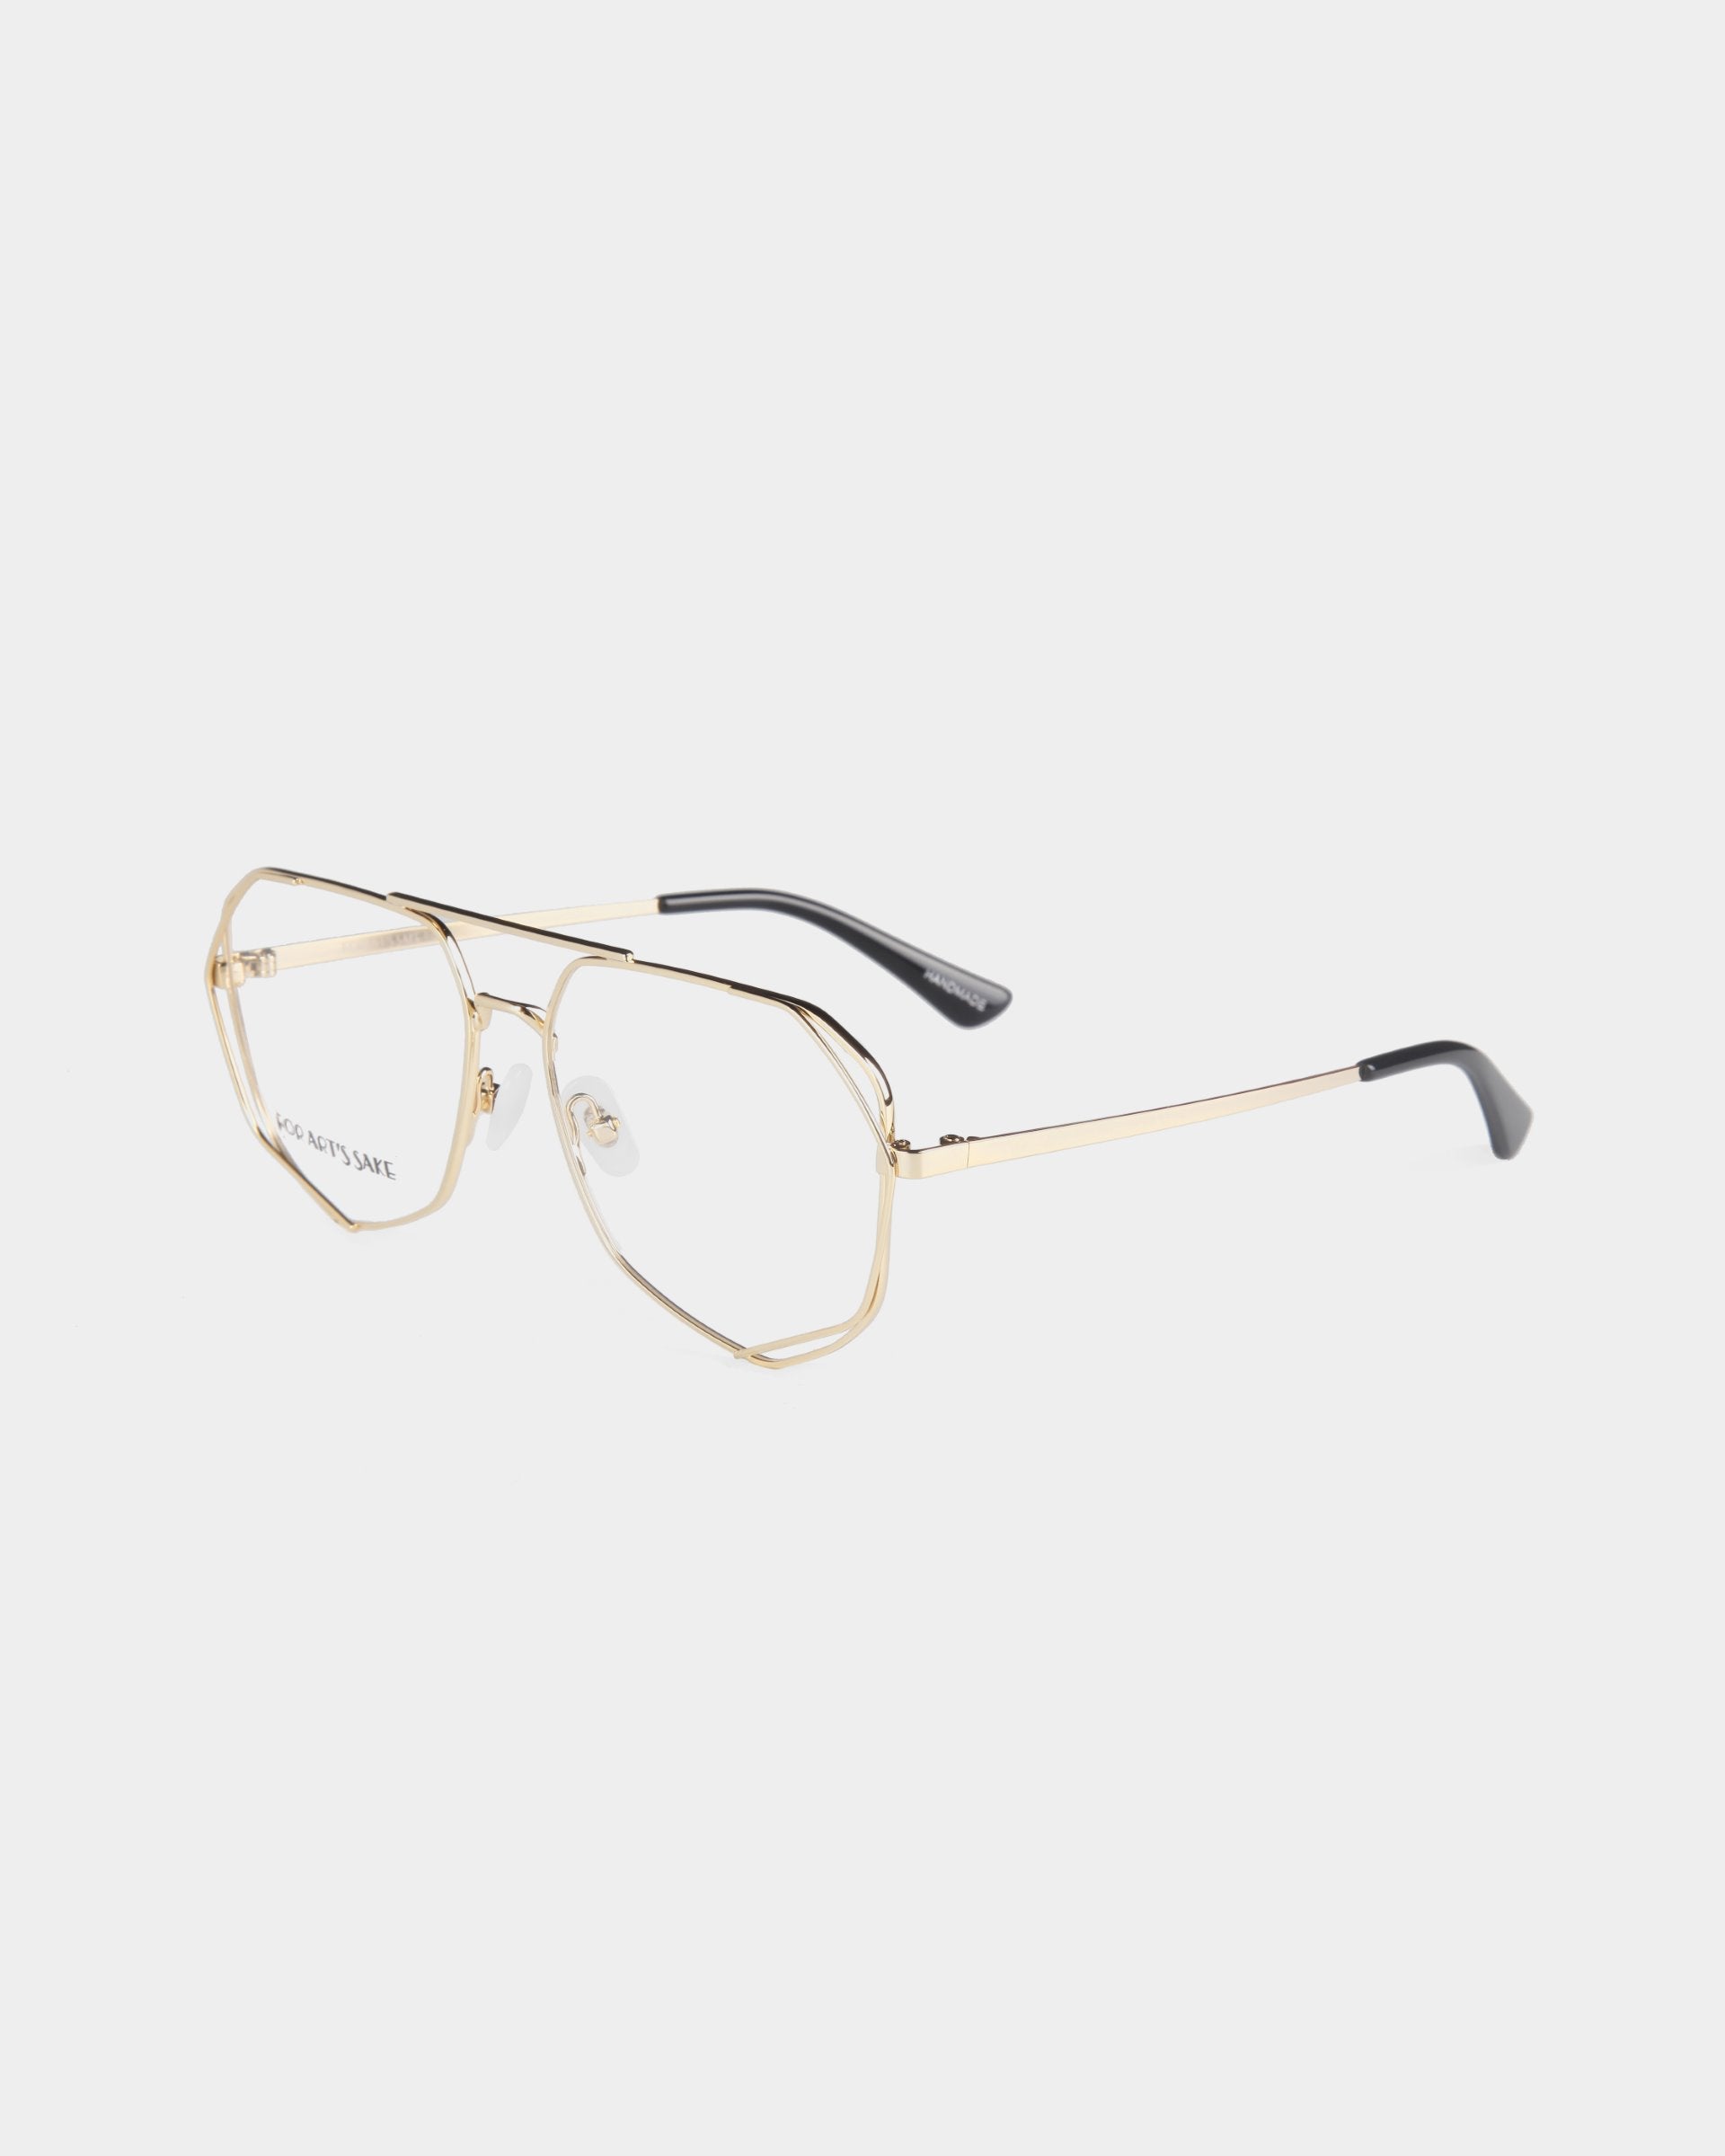 A pair of Genius eyeglasses with a thin stainless steel frame by For Art's Sake®. The lenses are clear, the nose pads are adjustable, and the temple tips are black. The design is sleek and modern, with an angular shape. Available with a blue light filter or via prescription service, they are displayed against a white background.